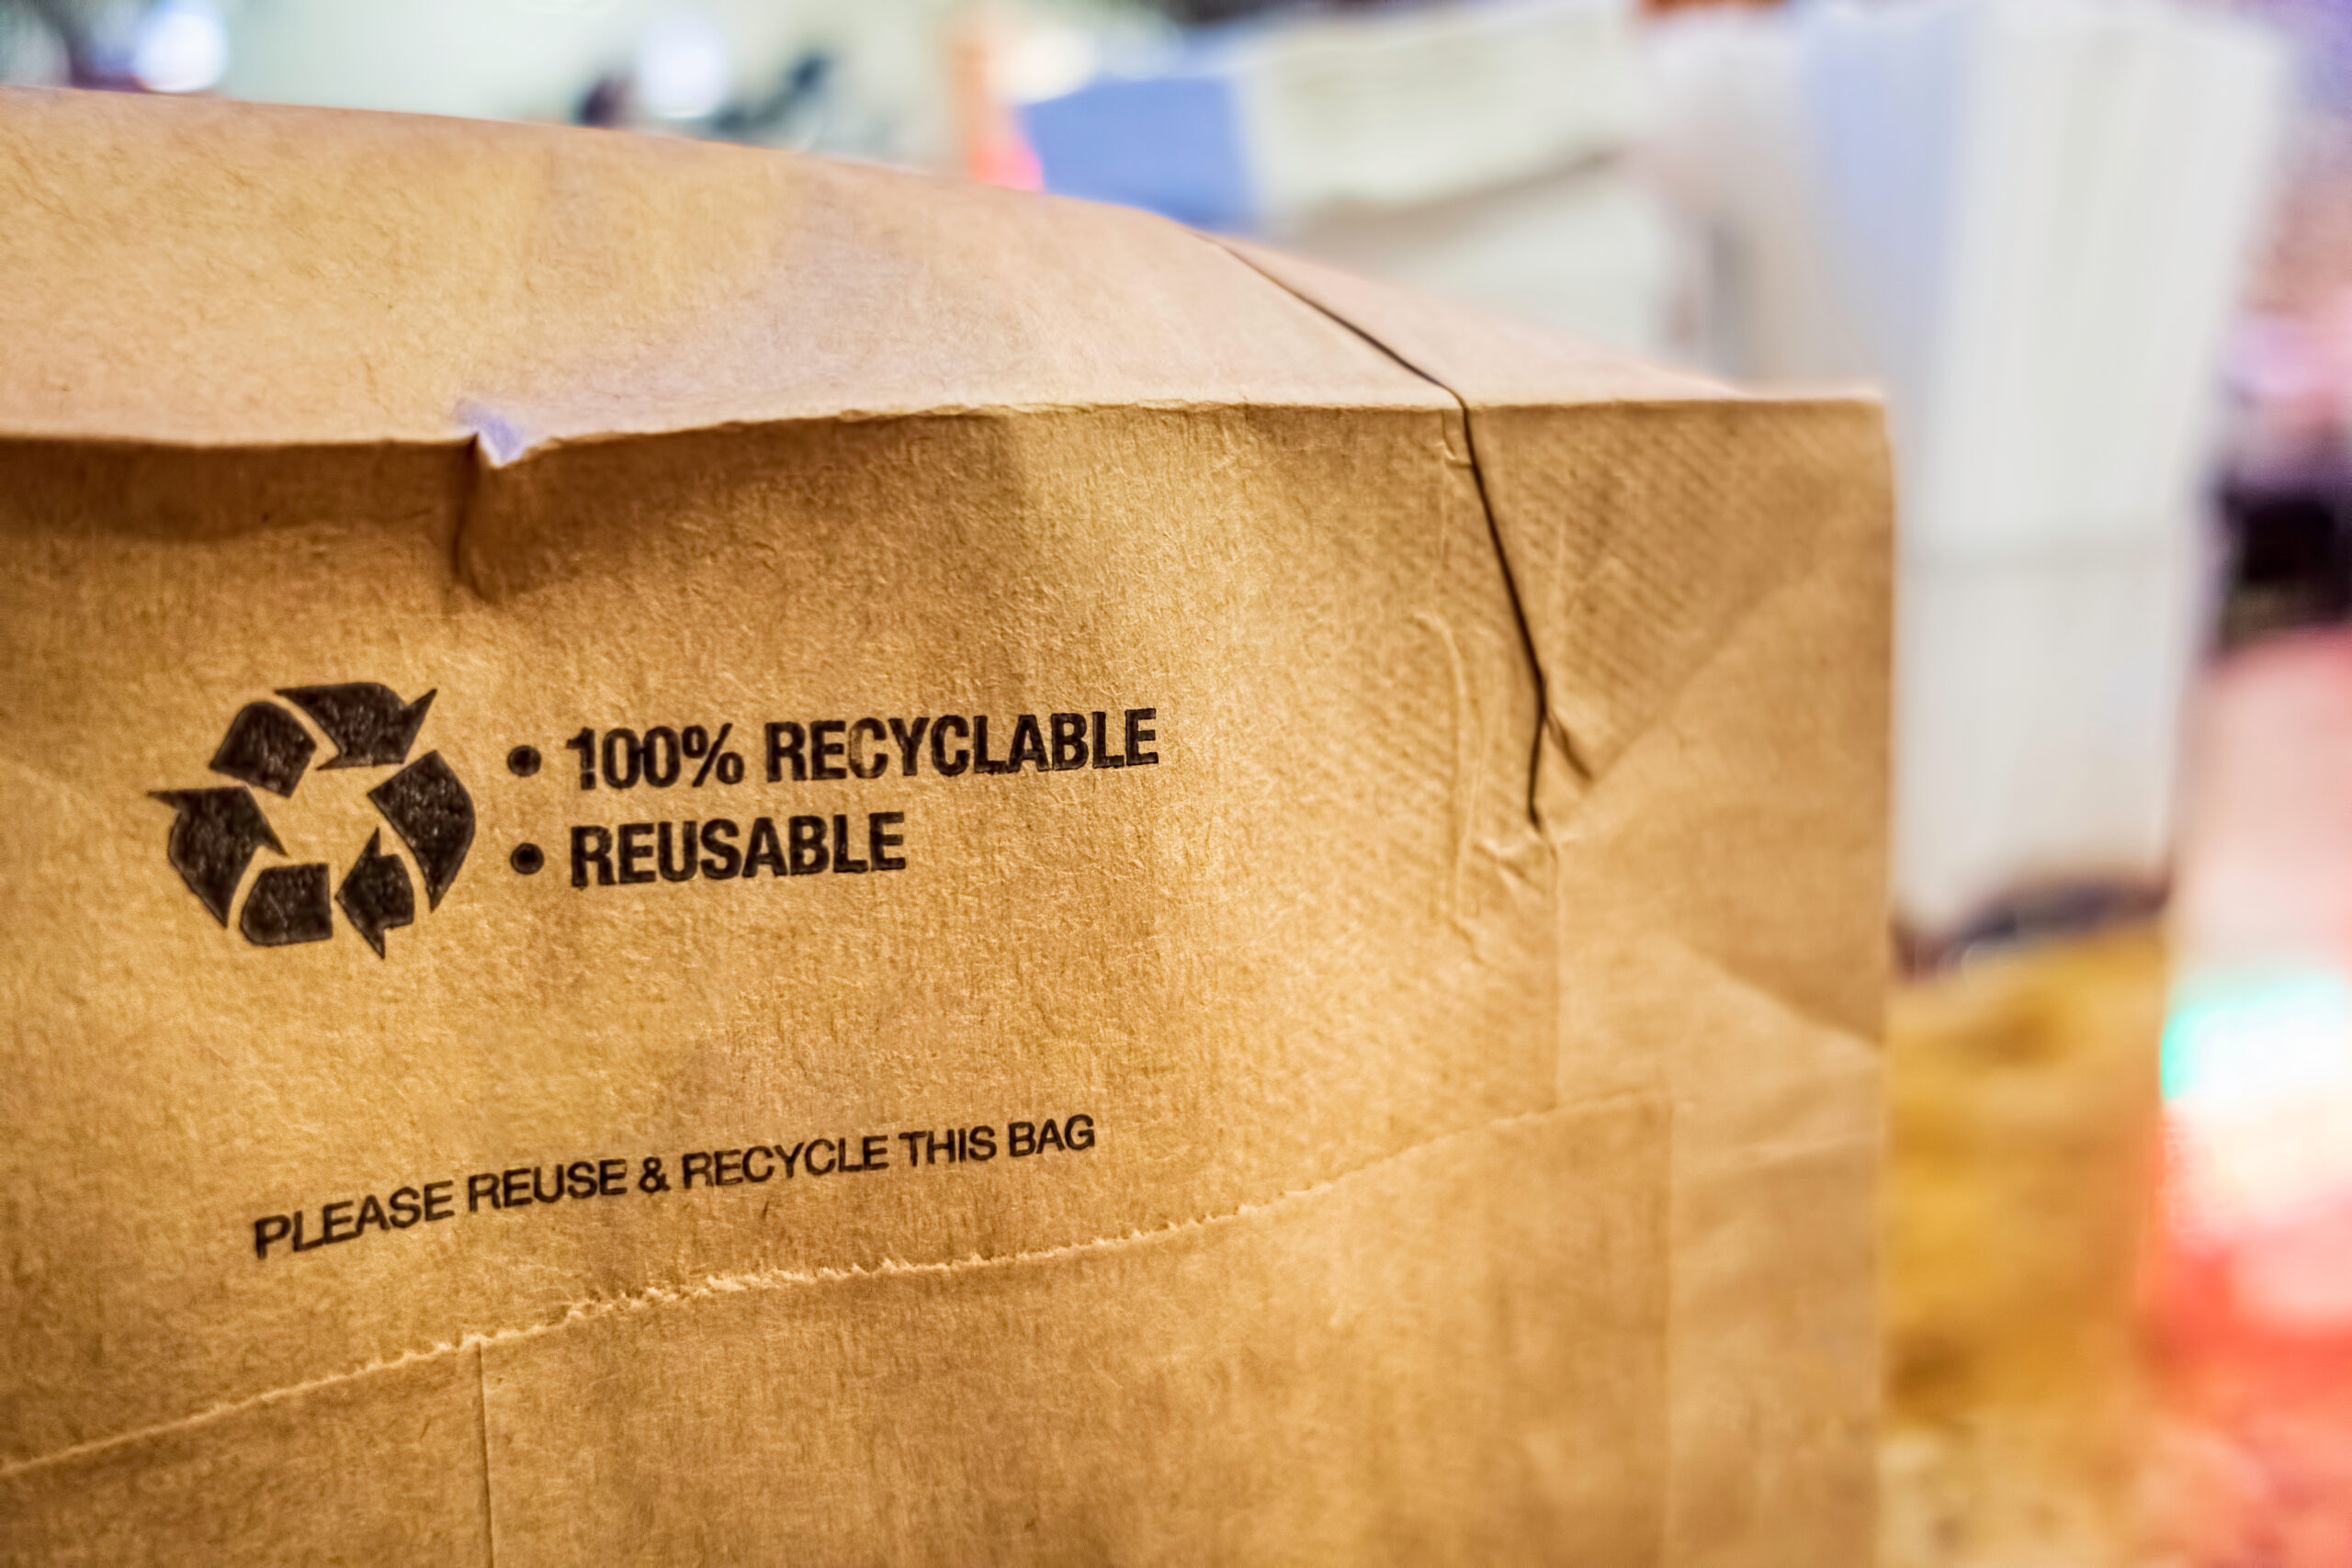 Consumers have come to expect sustainable packaging, study finds